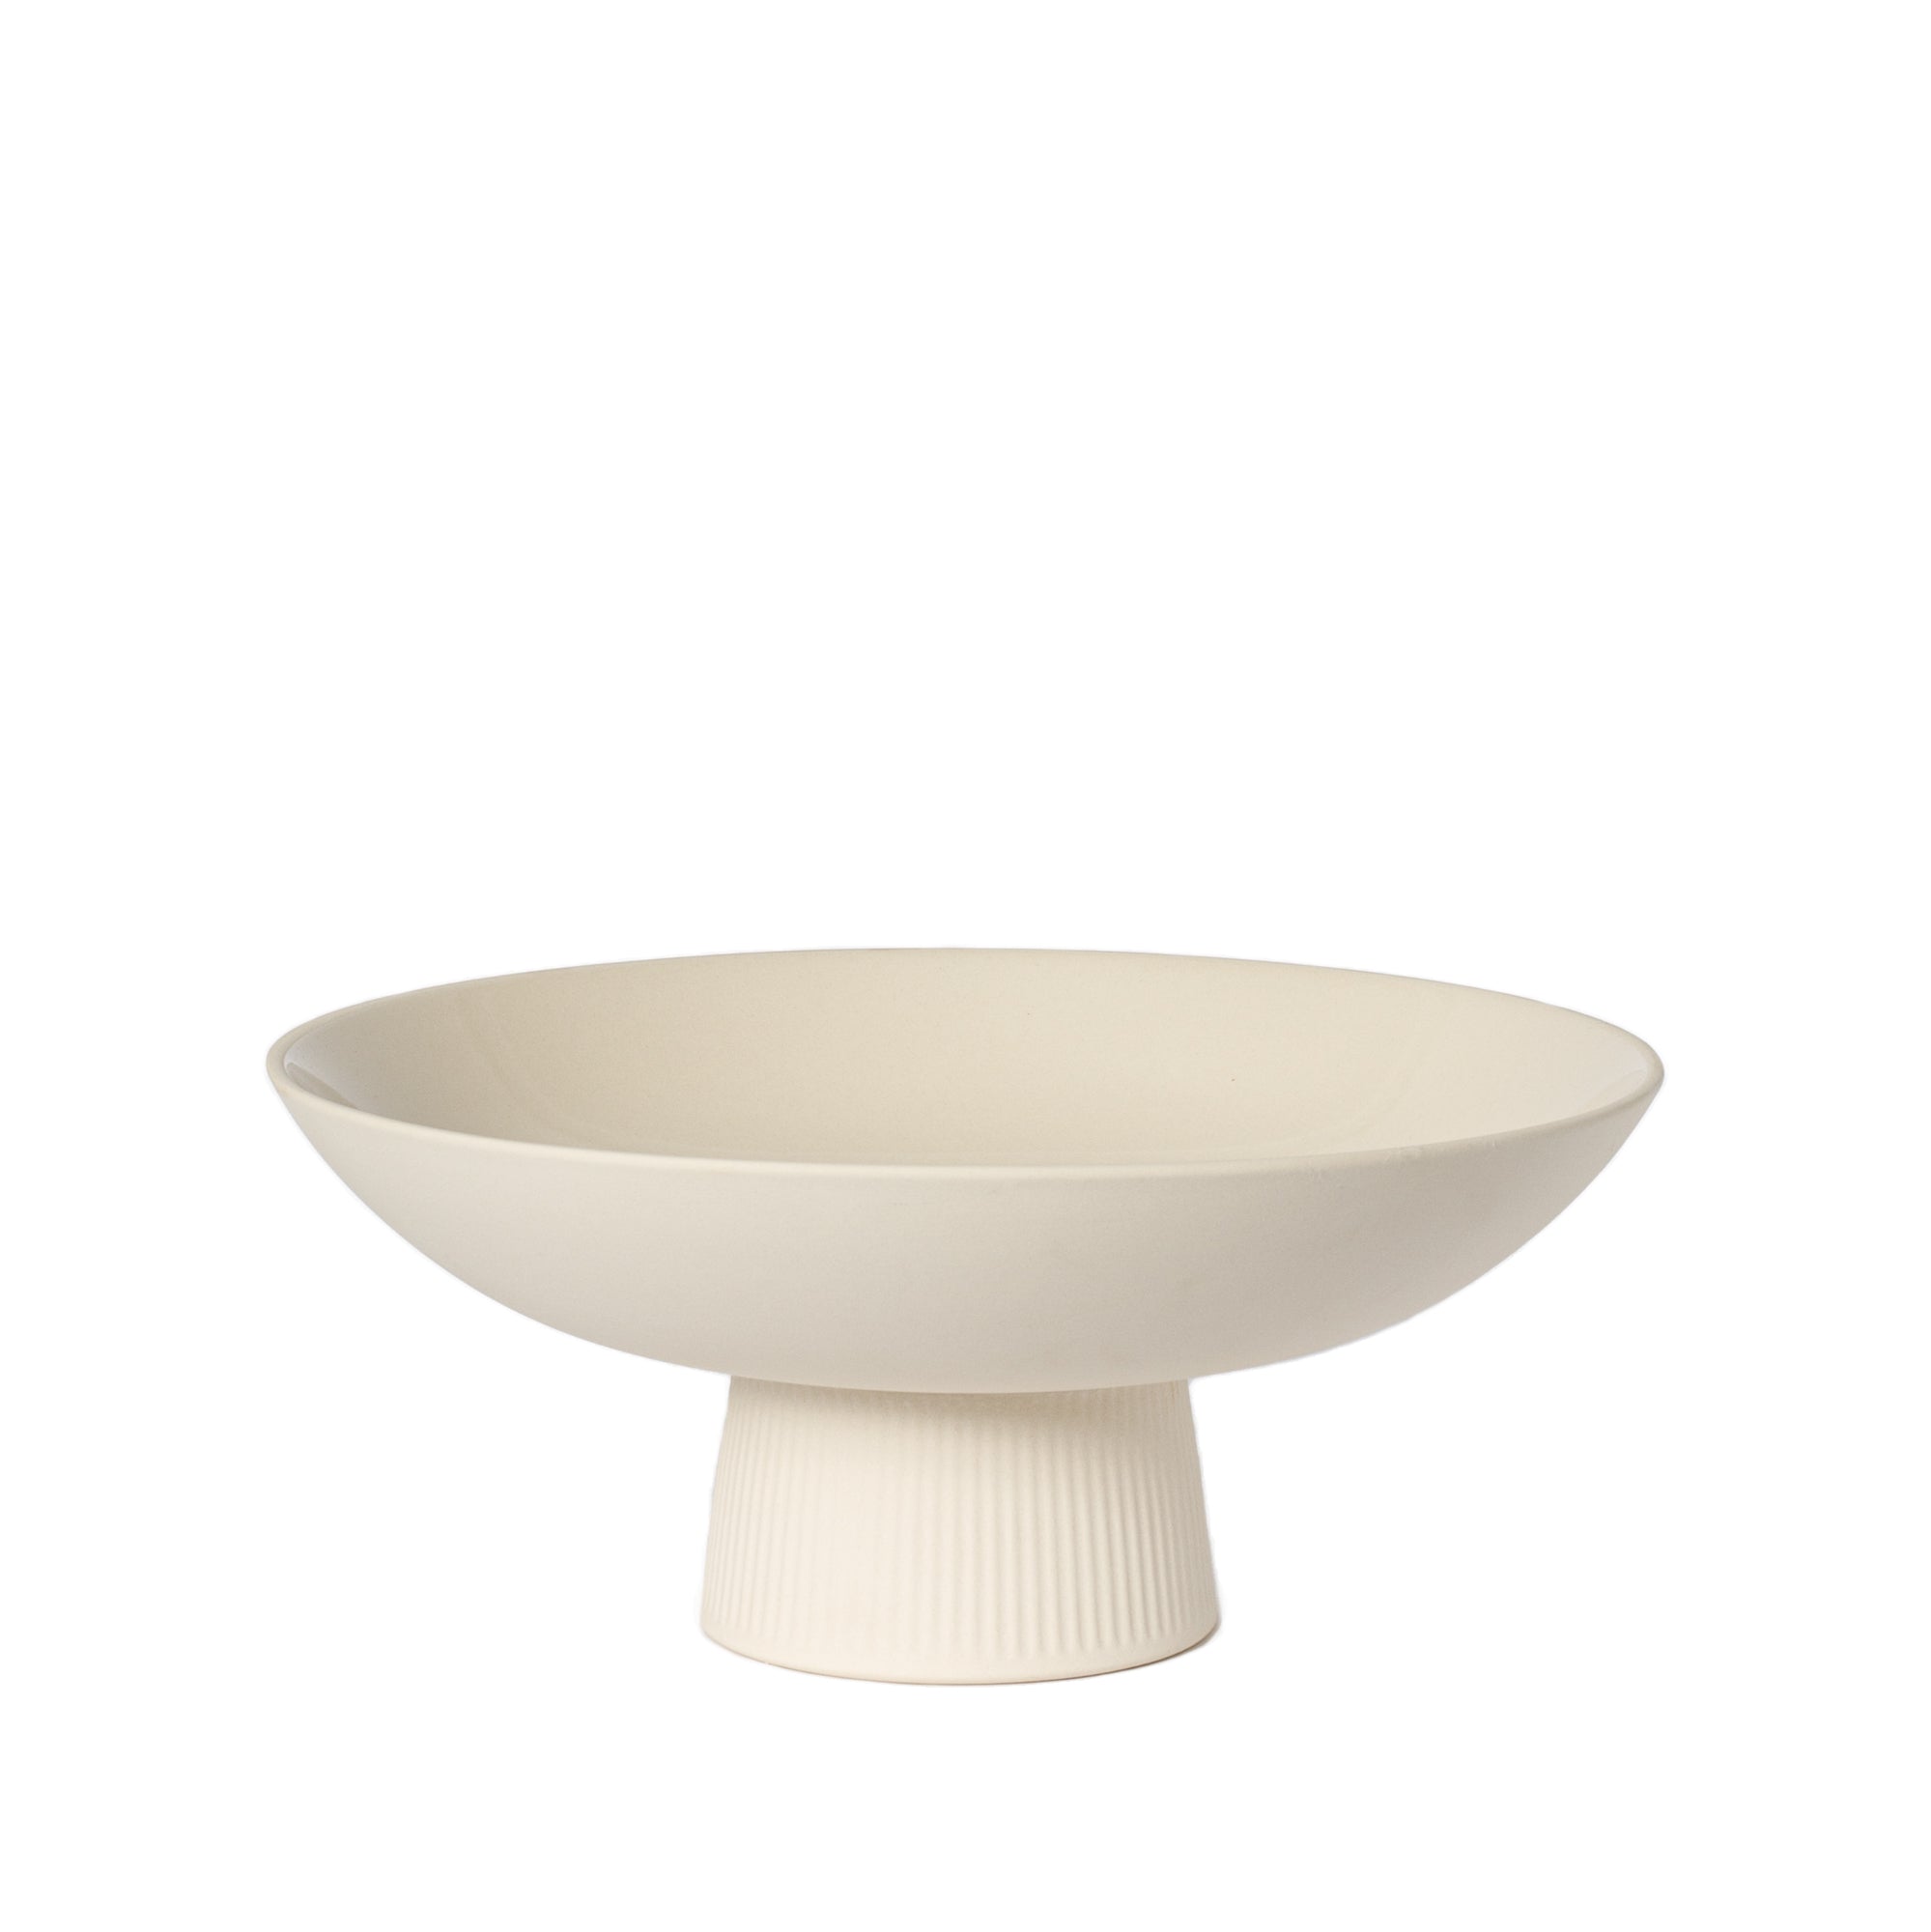 Ceramic Bowl for Hire | For Love & Living Gold Coast Weddings & Events